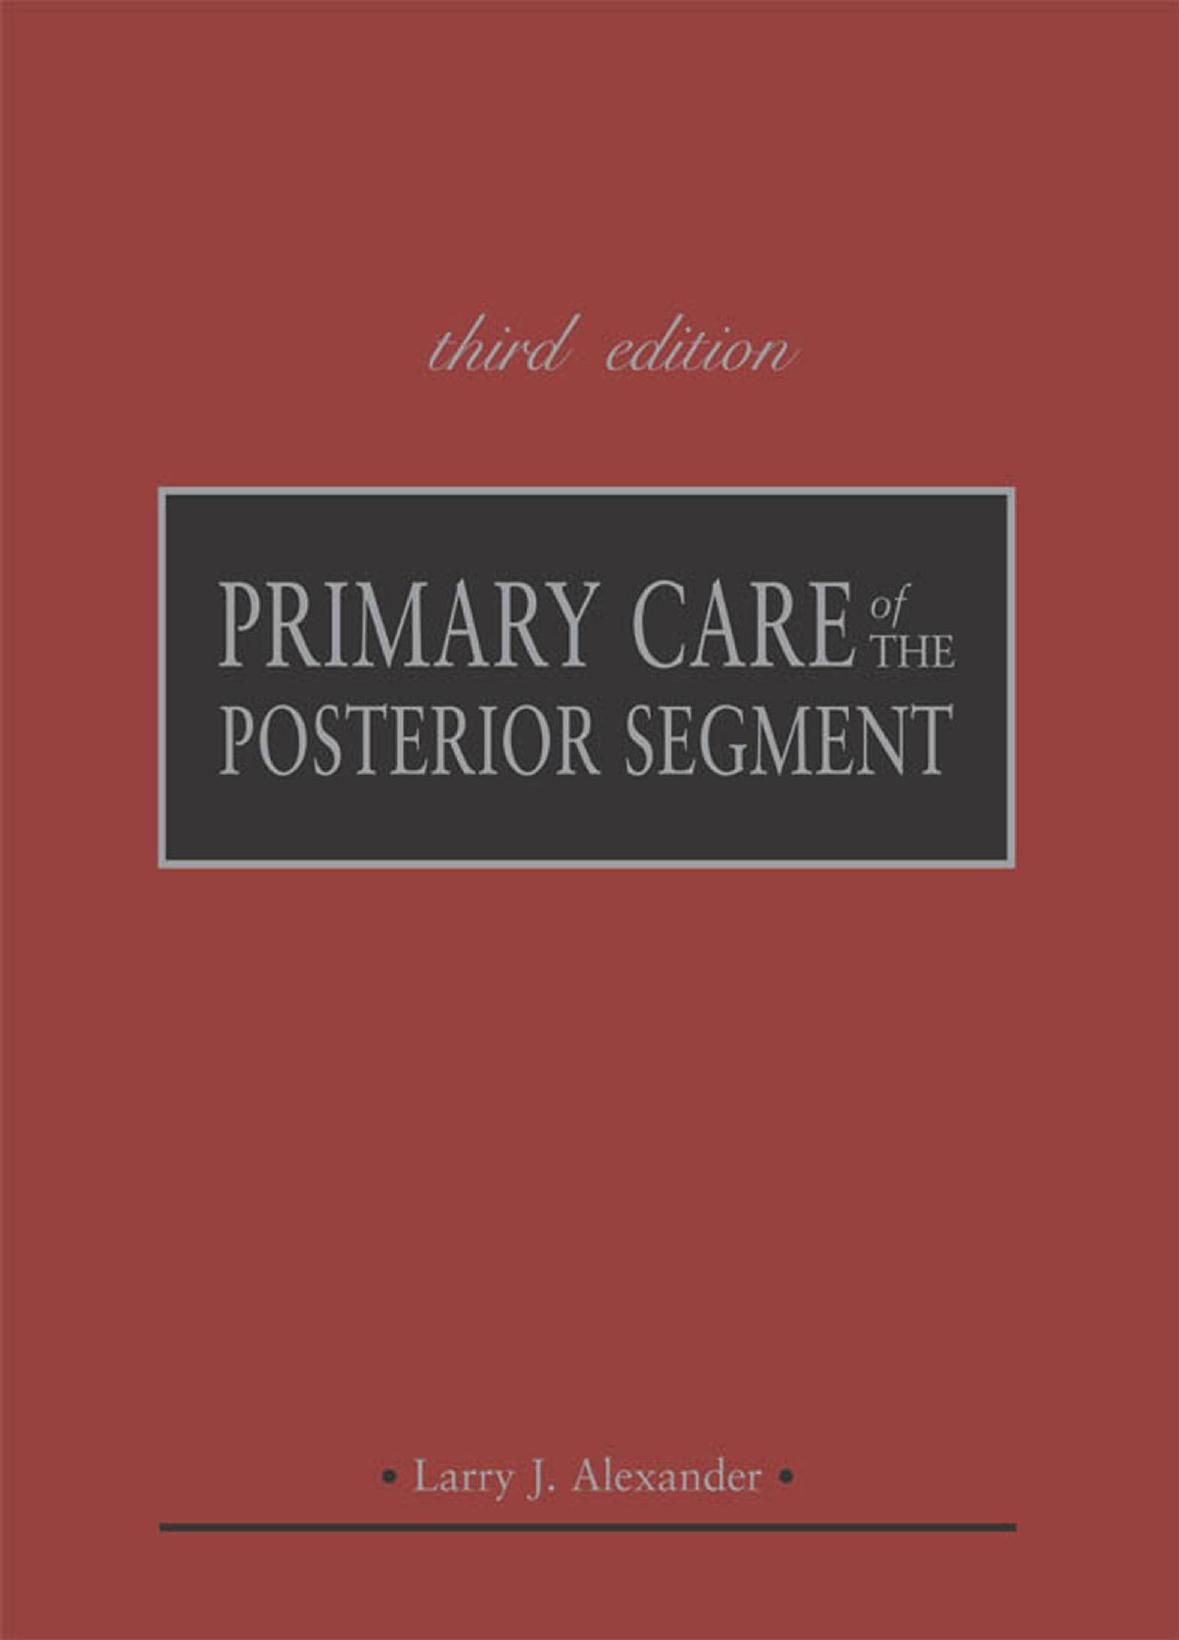 Primary Care of the Posterior Segment, 3rd Edition by Larry Alexander.jpg